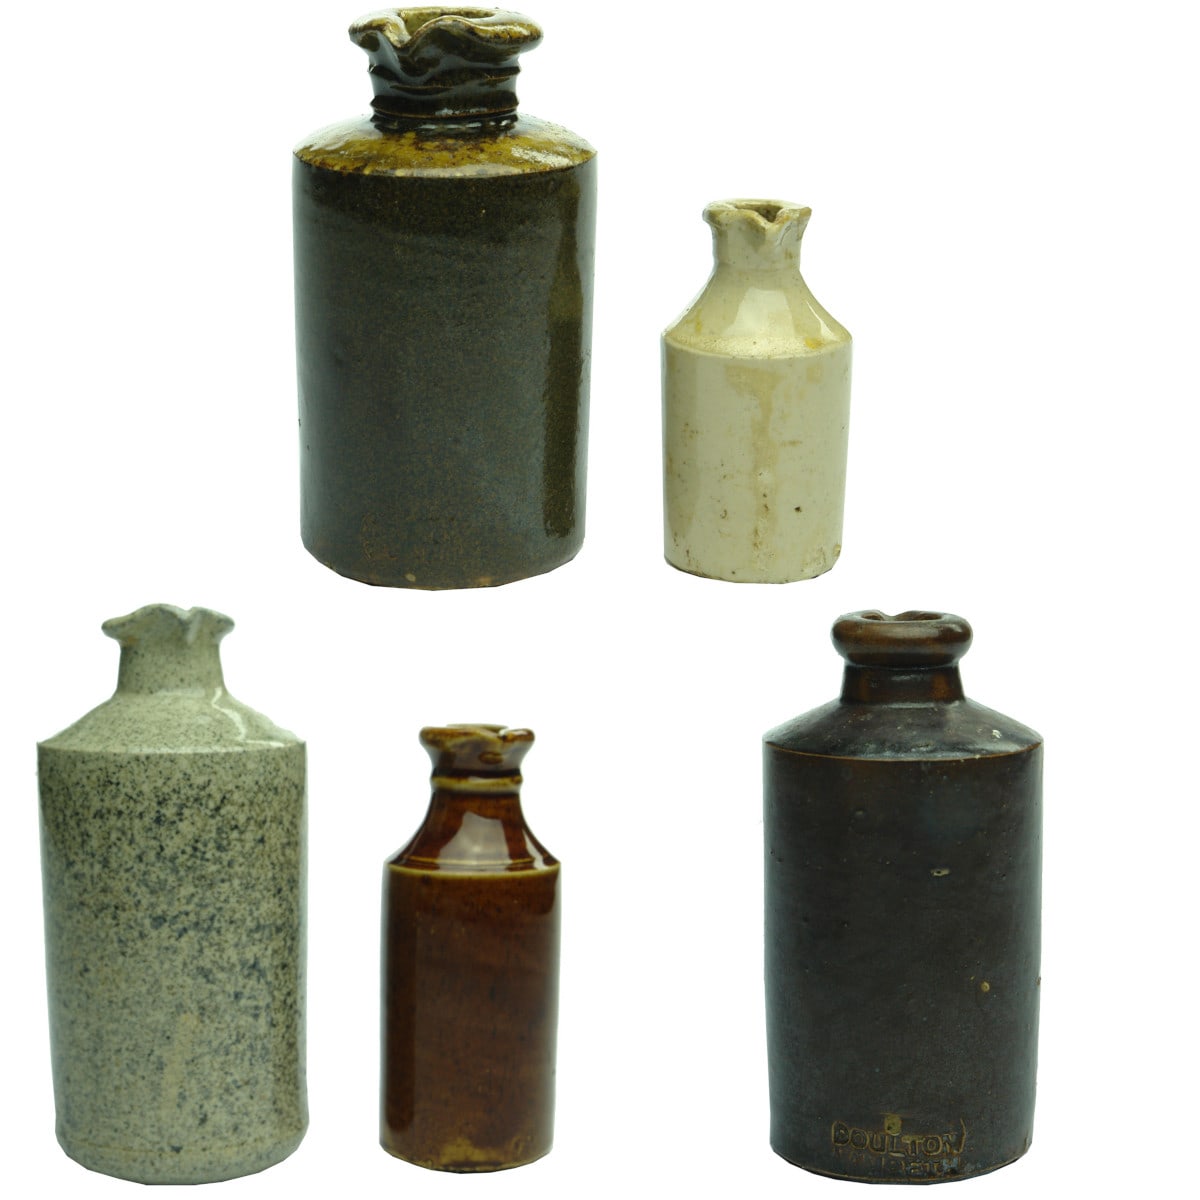 Five stoneware inks with pouring lips. Tiny up to about 10 oz. Fowler; Bendigo Pottery; Doulton; 2 unmarked.